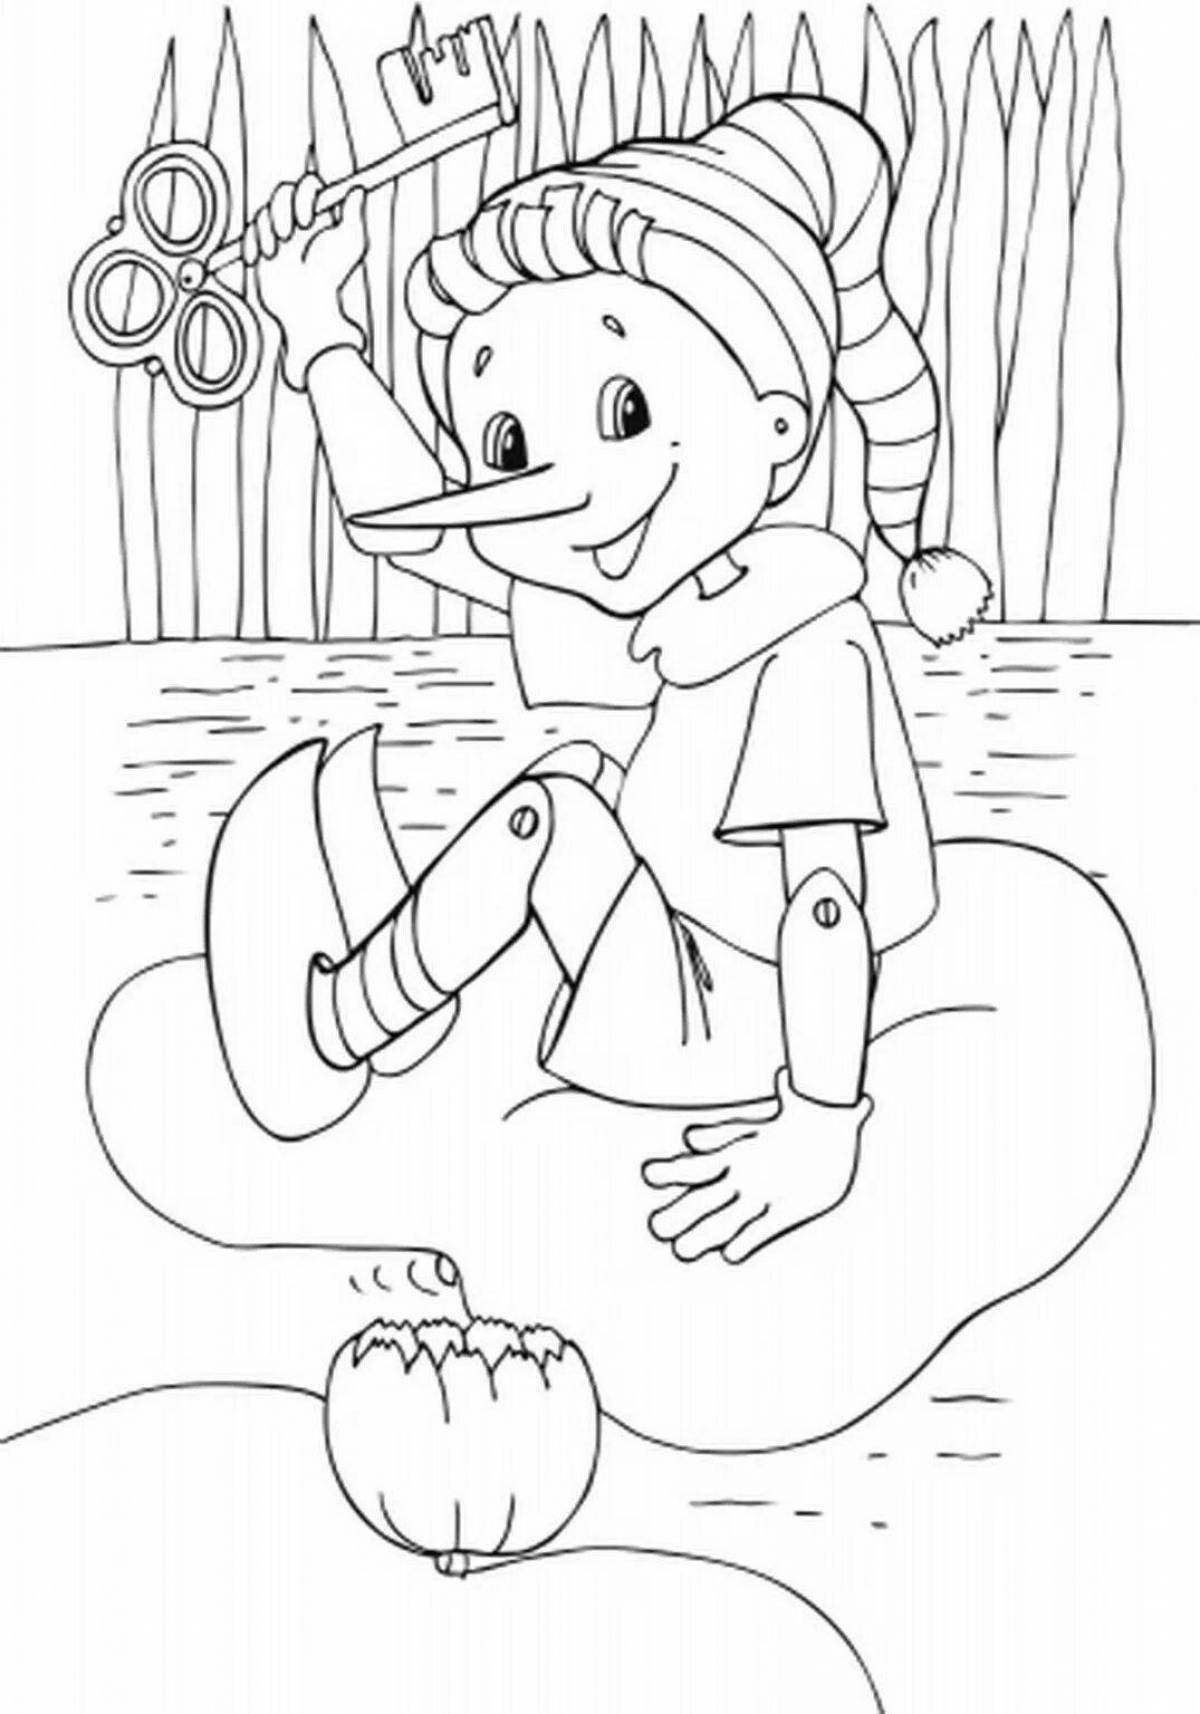 Awesome pinocchio coloring book